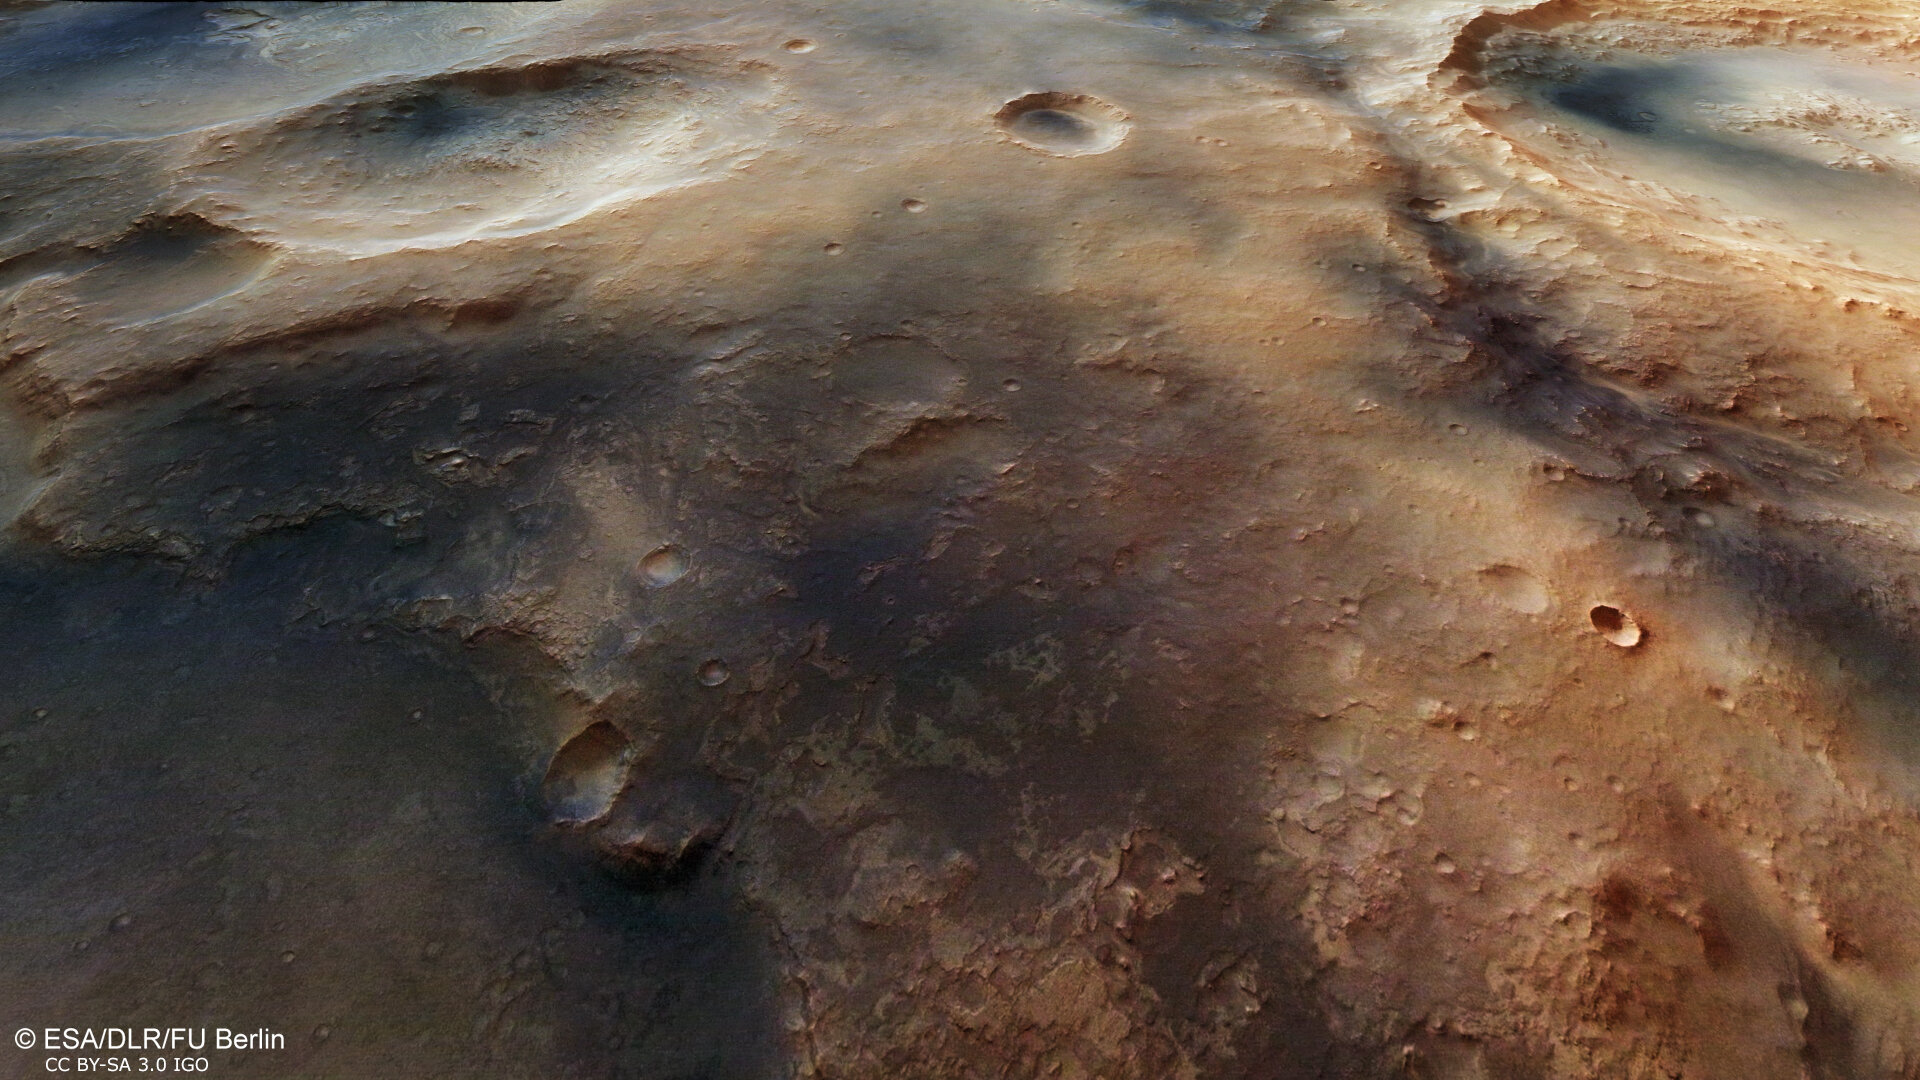 Perspective view of Nili Fossae